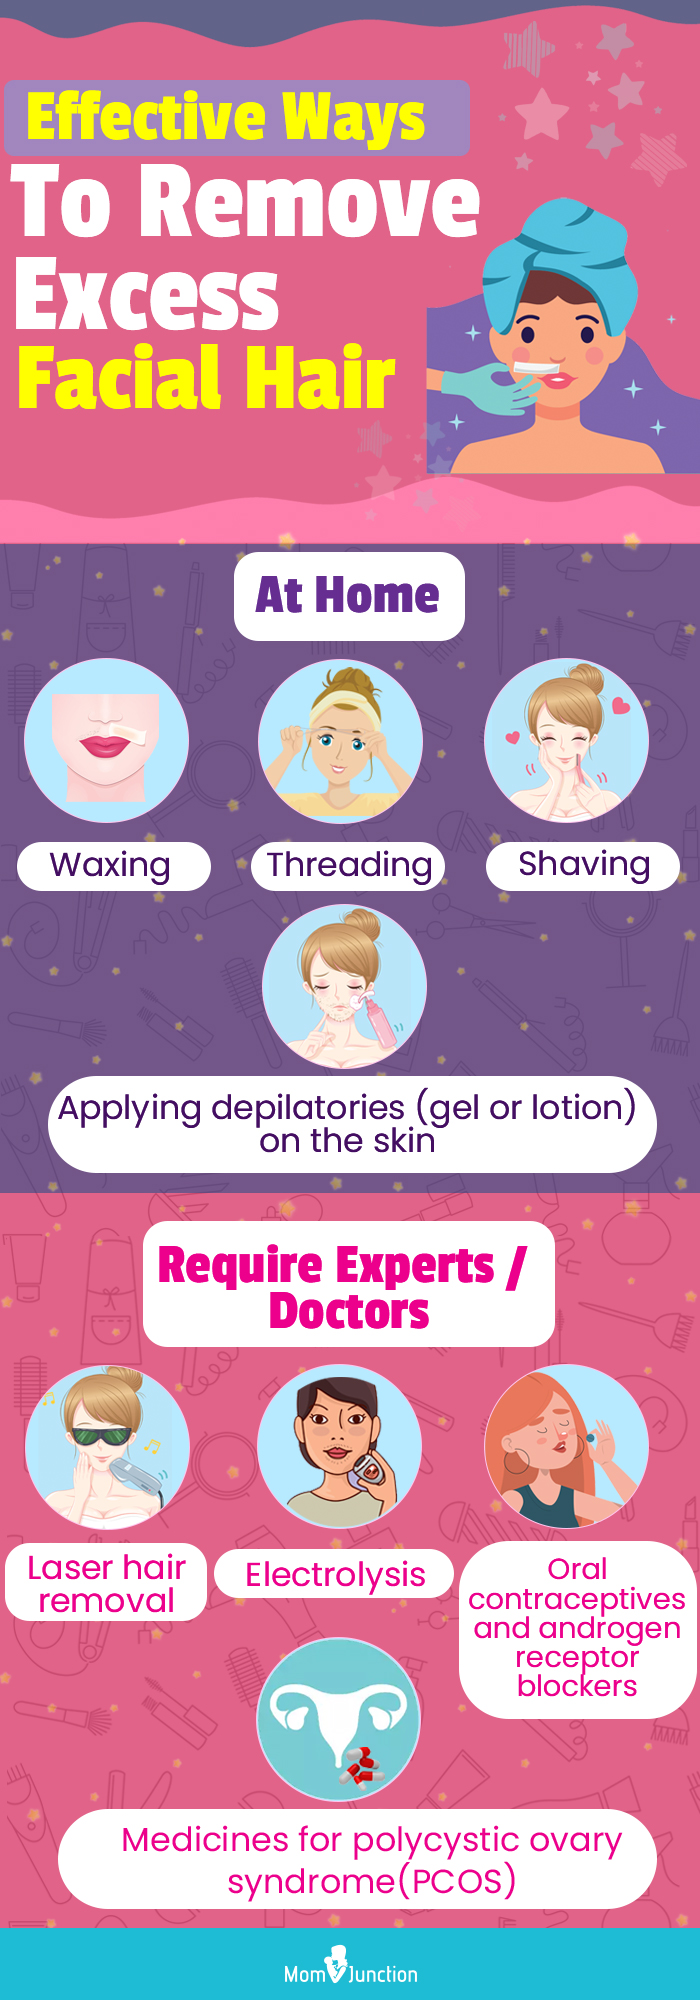 effective ways to remove excess facial hair (infographic)